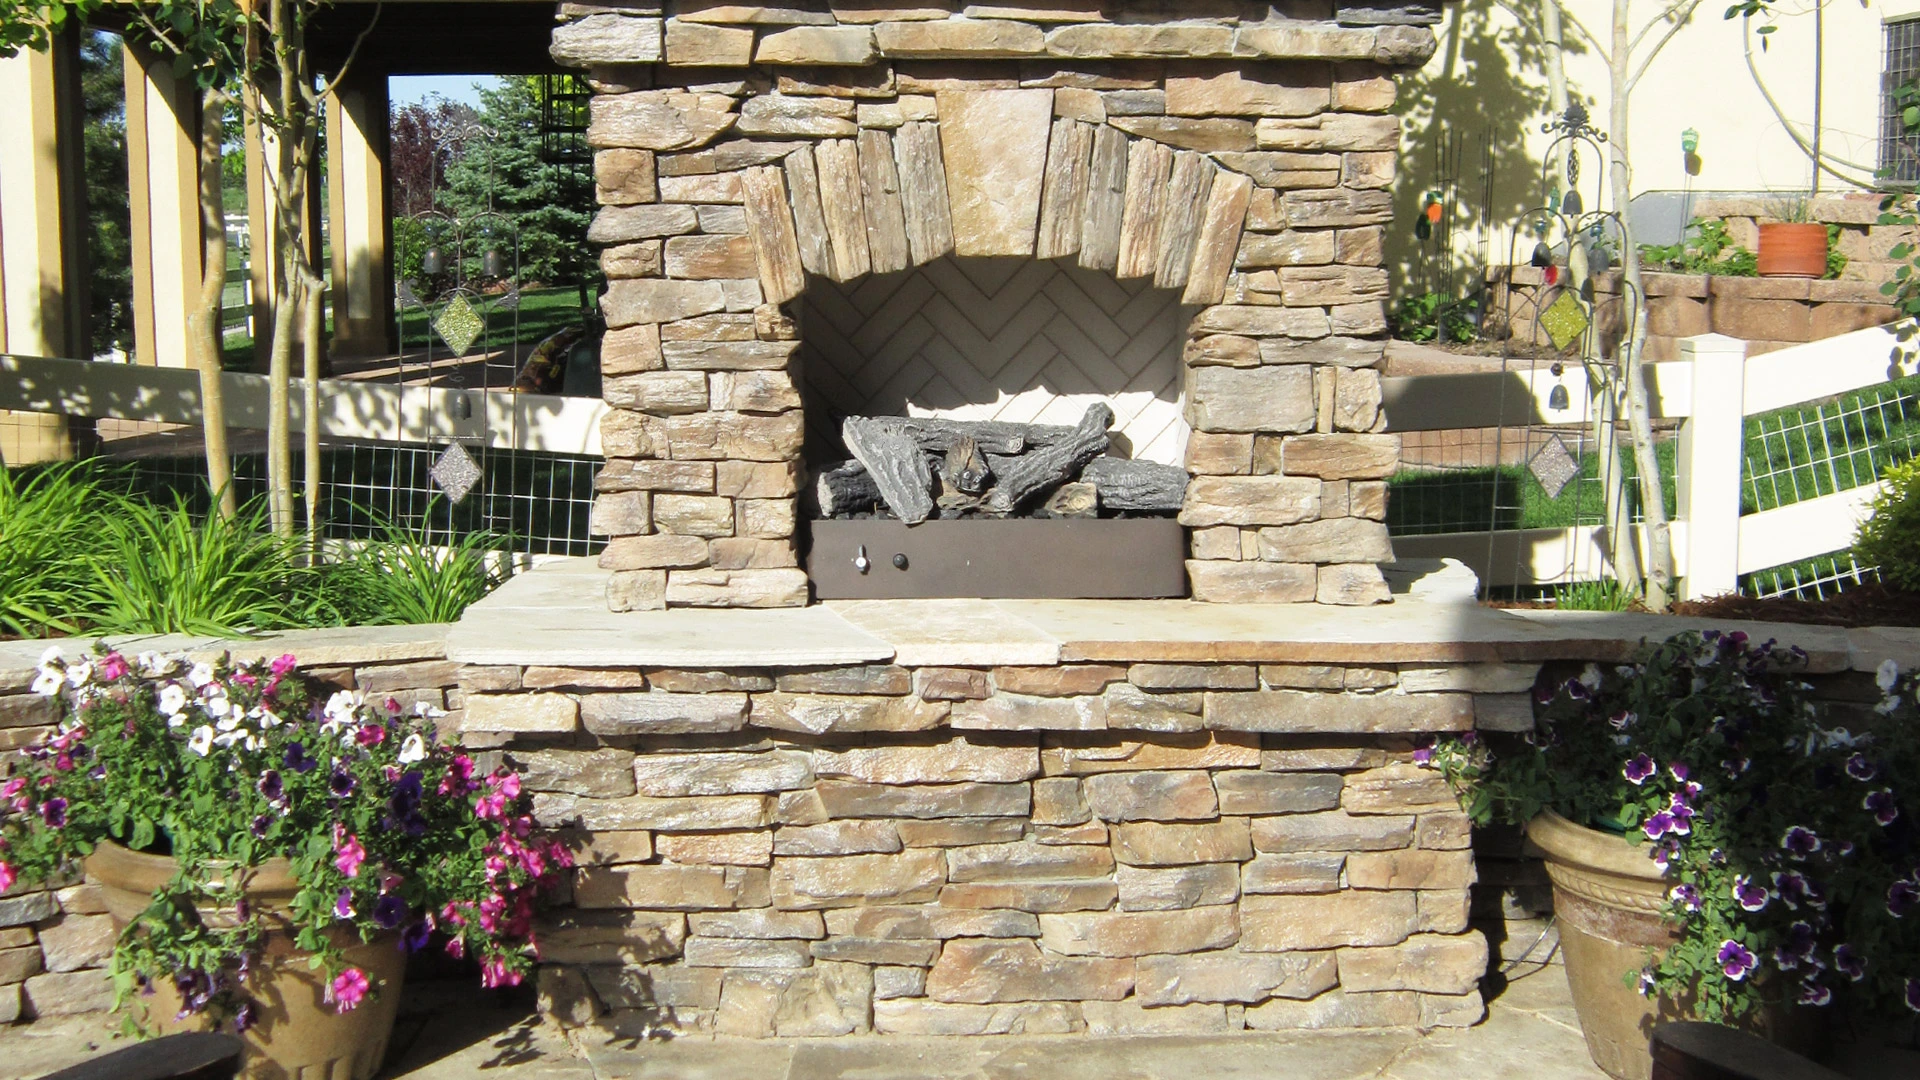 A brand new custom fireplace that was just installed in this homeowner's backyard in Loveland, CO.